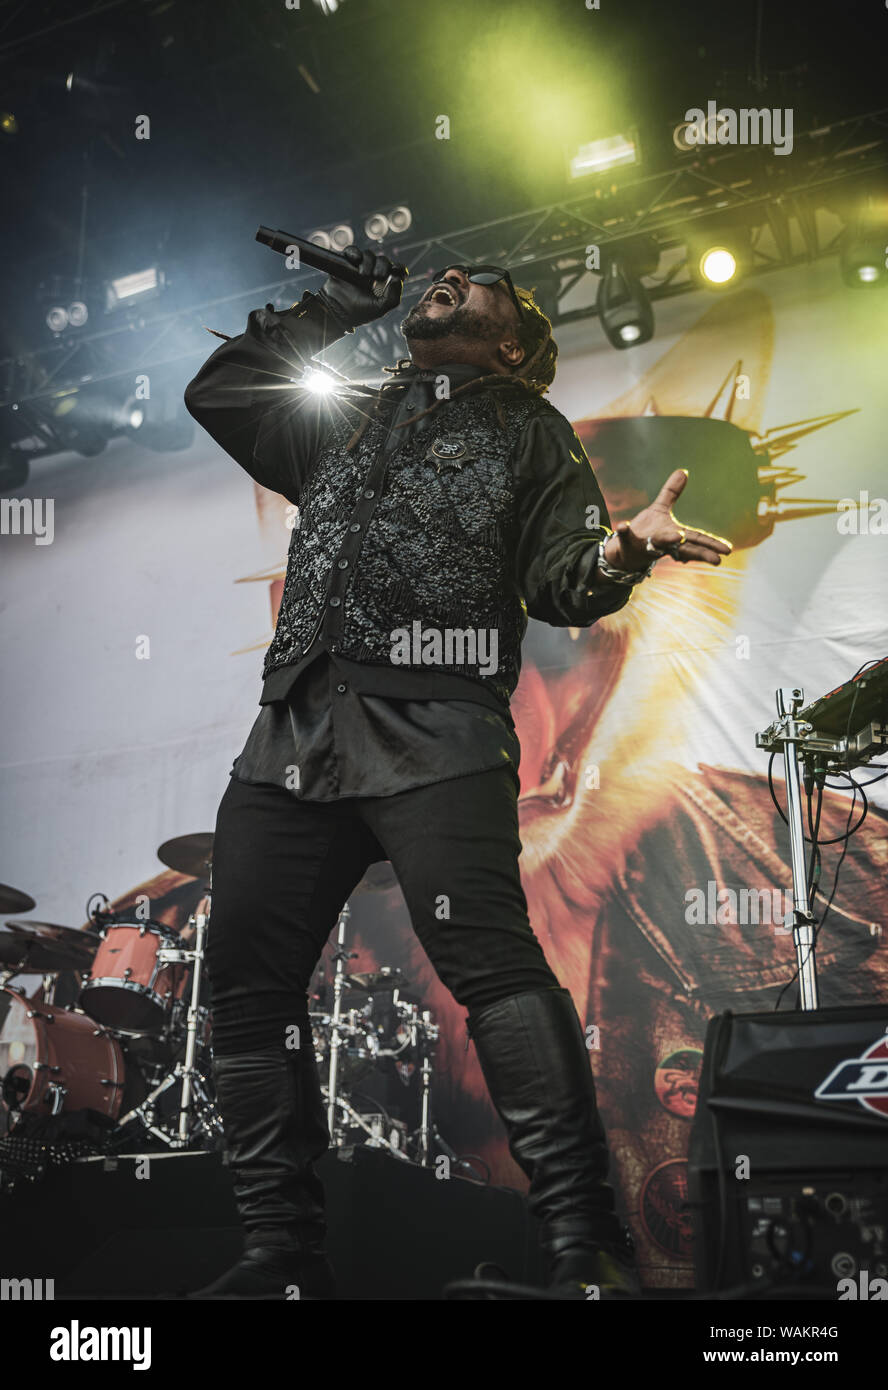 Copenhagen, Denmark - 20th June, 2019. The Welsh metal band Skindred performs a live concert during the Danish heavy metal festival Copenhell 2019 in Copenhagen. Here vocalist Benji Webbe is seen live on stage. (Photo credit: Gonzales Photo - Nikolaj Bransholm). Stock Photo